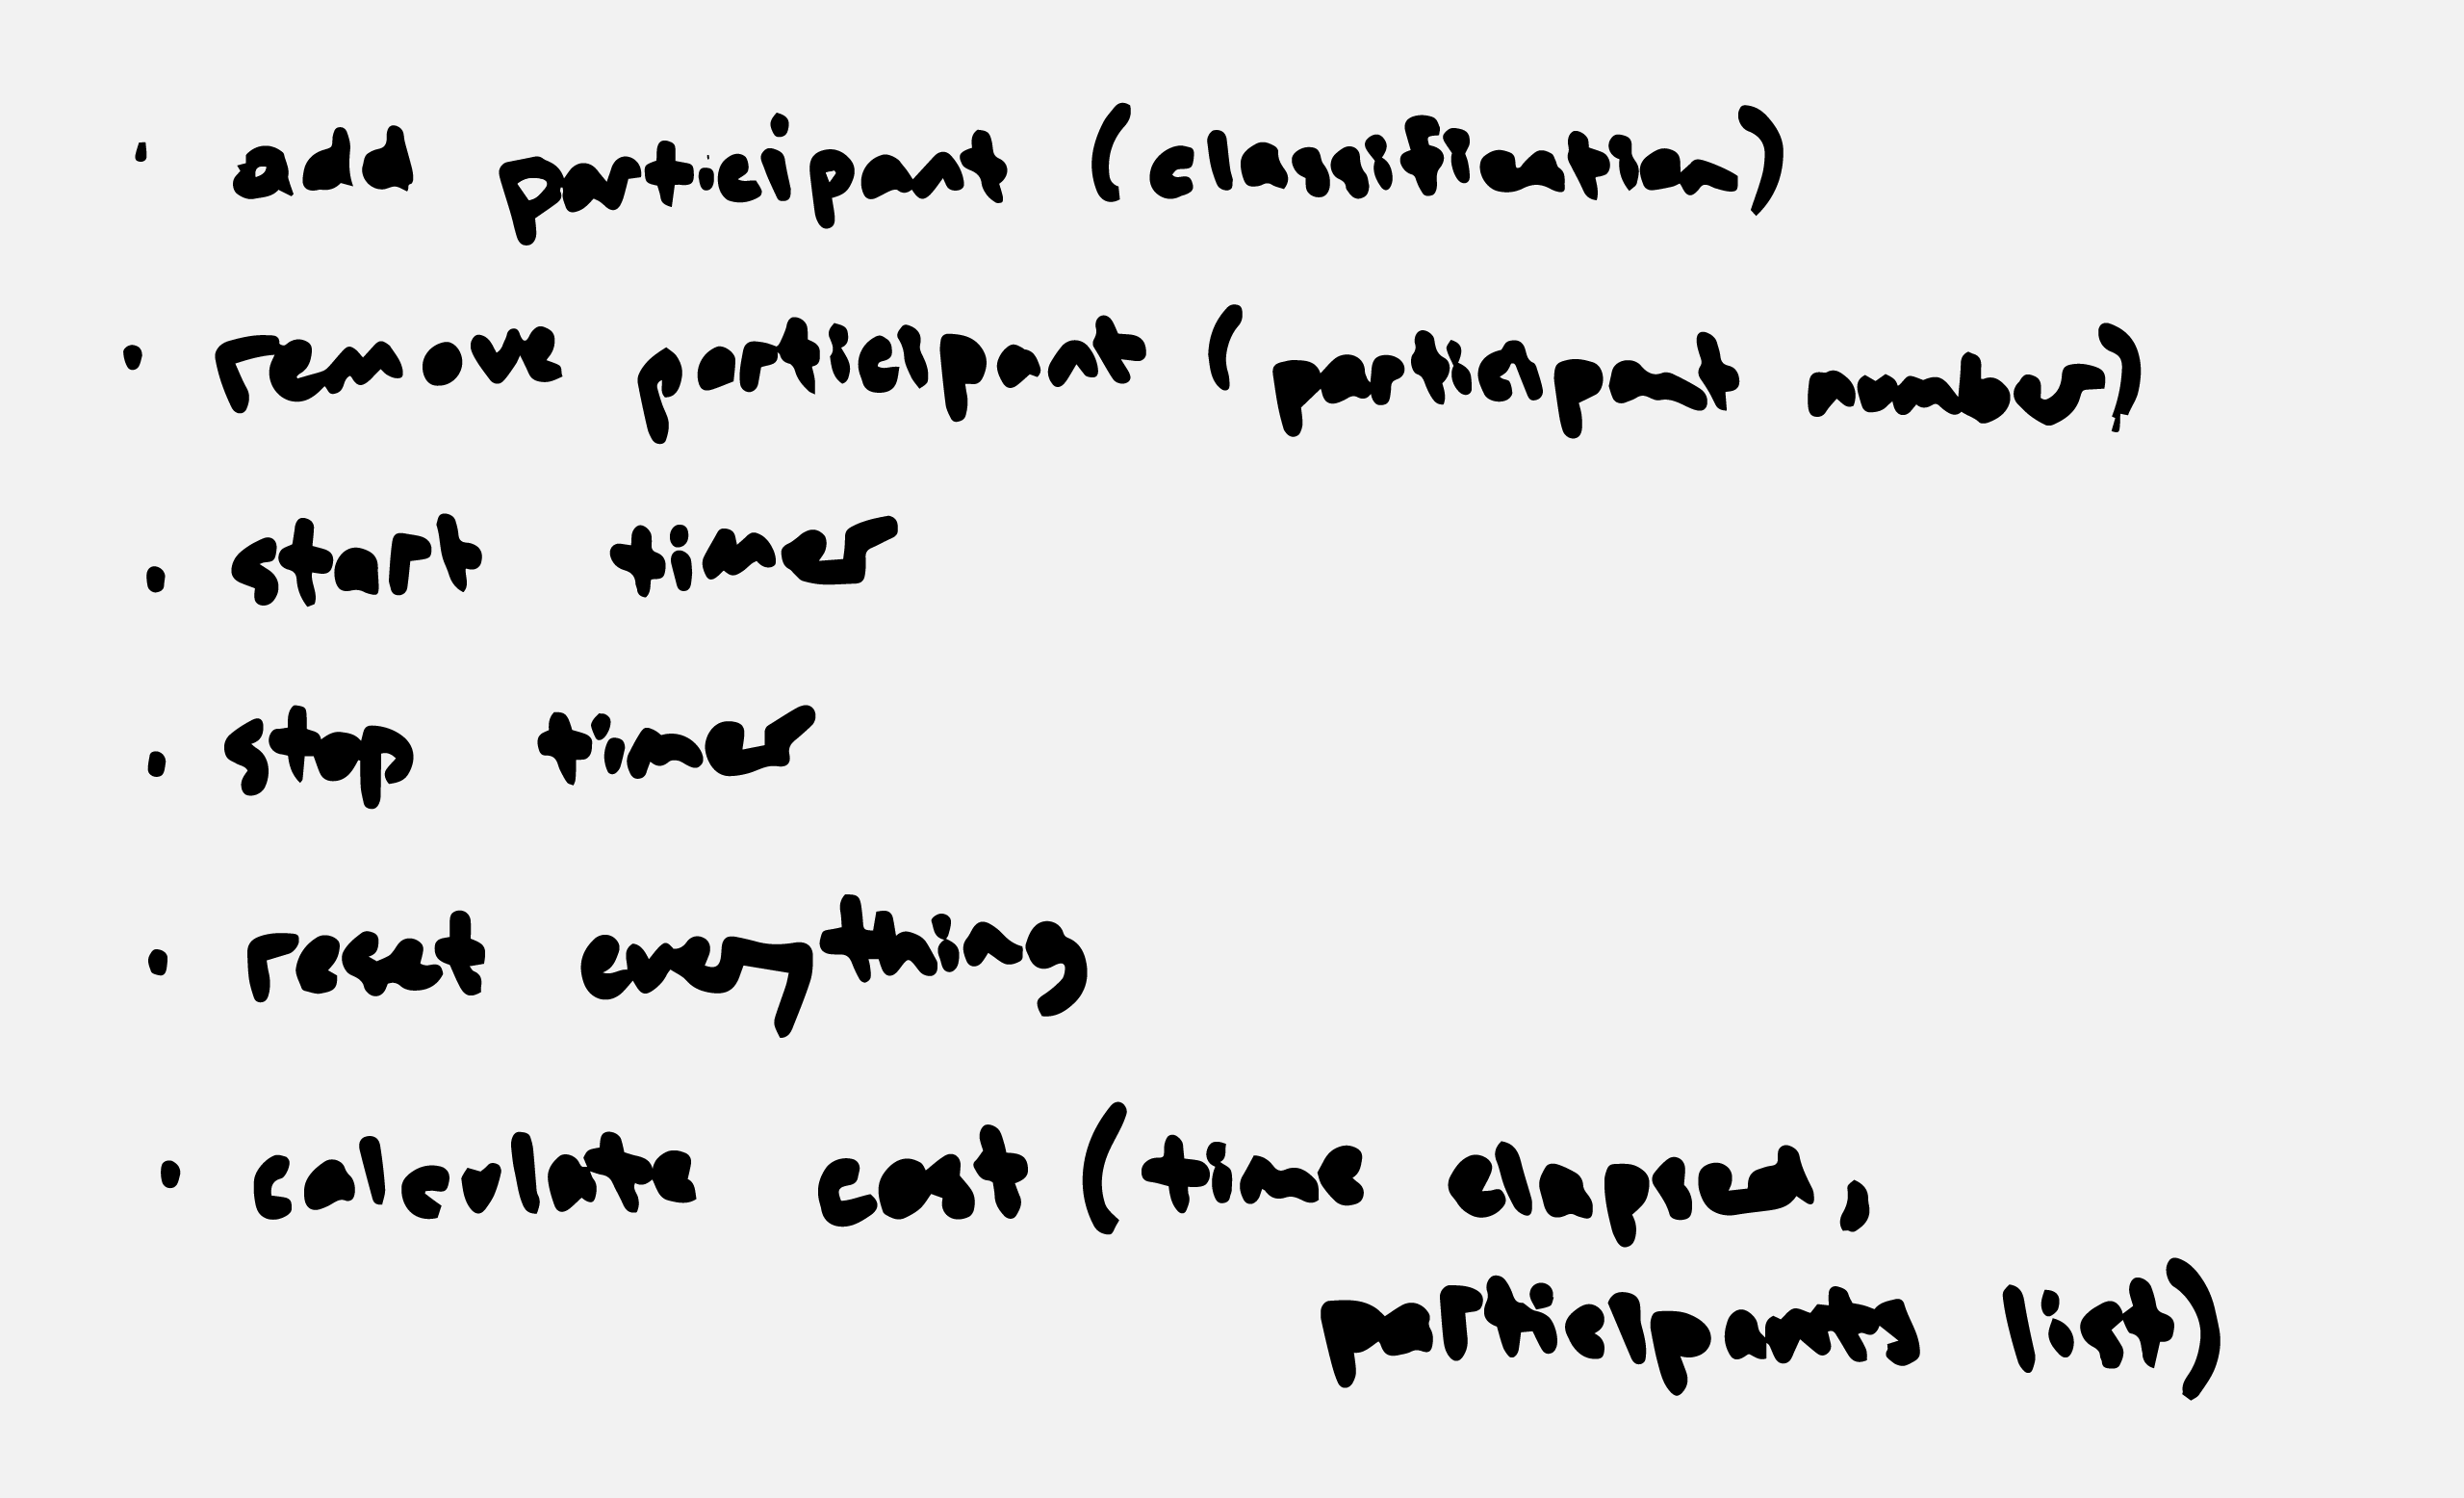 A hand-drawn list of example functions for the Meeting Cost Calculator: add participants (with a specified classification), remove participants (with a participant number), start the timer, stop the timer, reset everything, and calculate the cost (with time elapsed and a participant list).